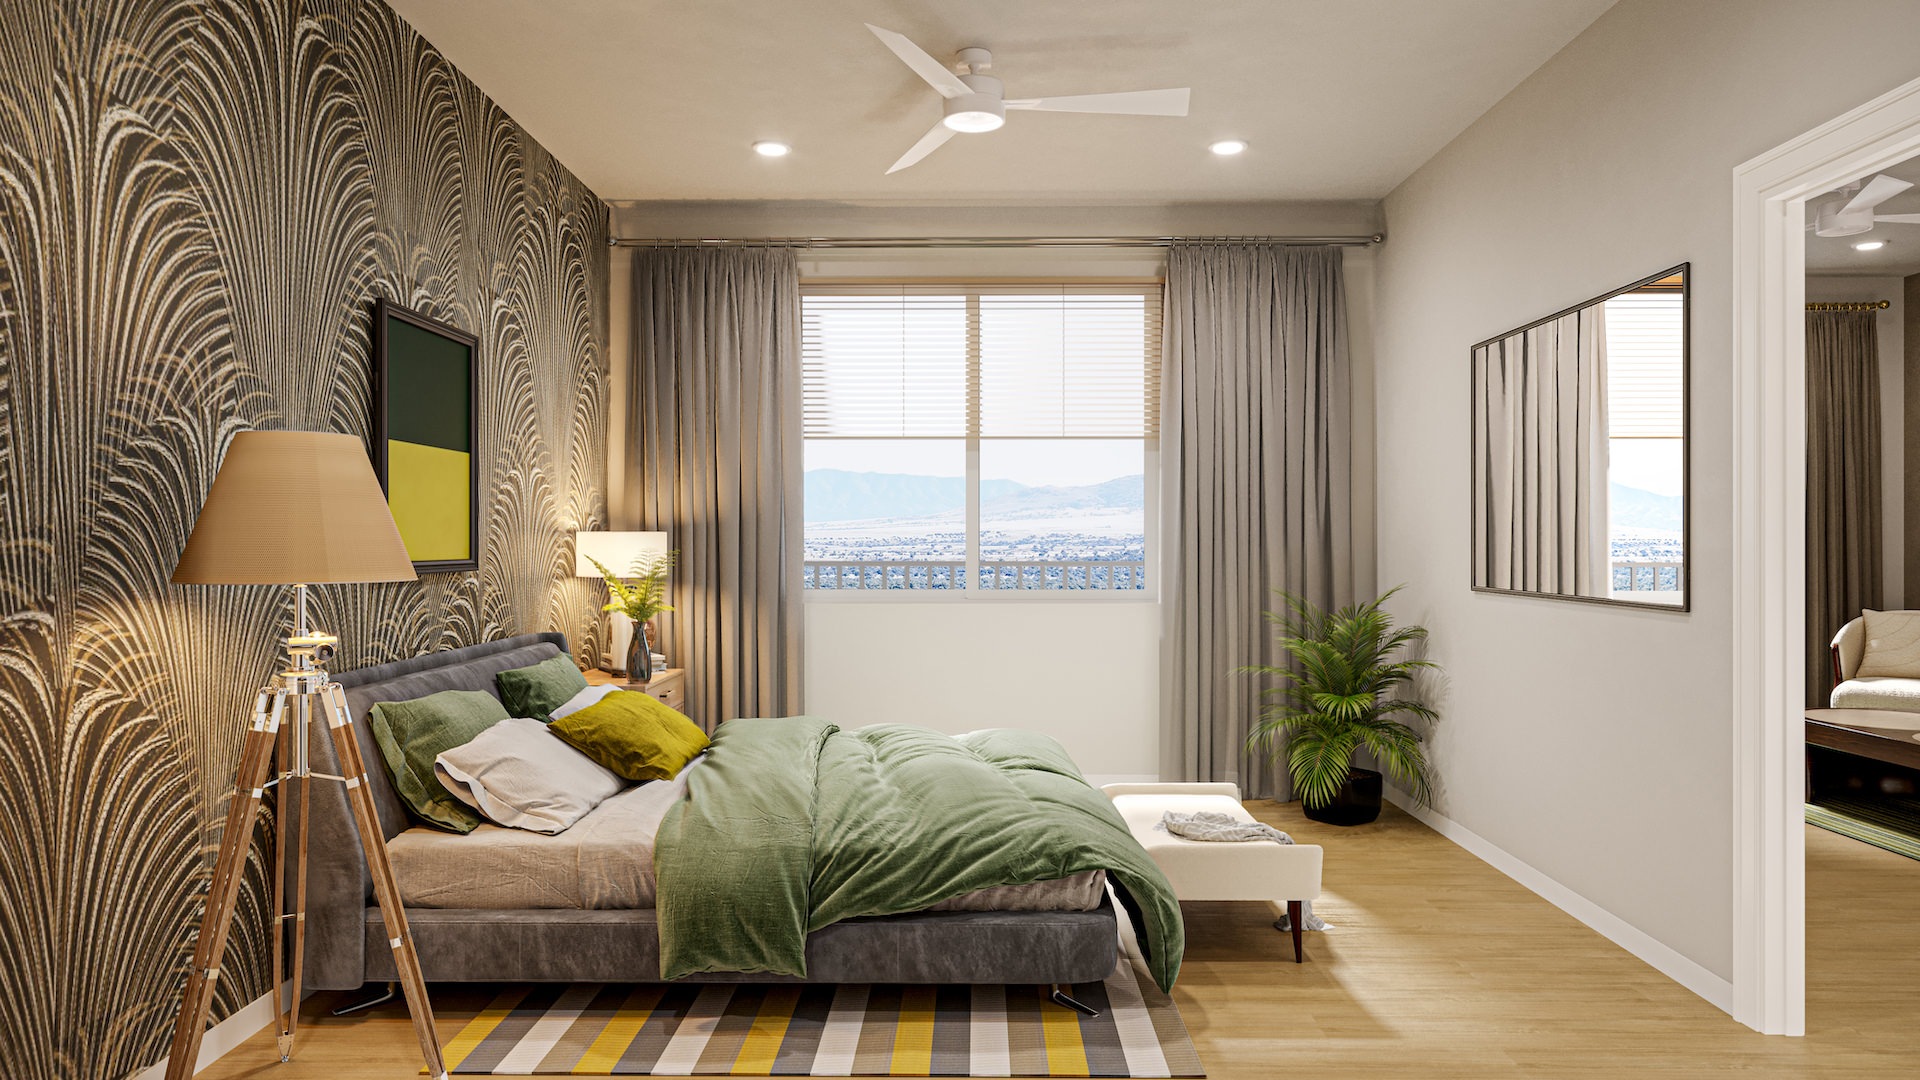 Large well lit bedroom with wood floors and large windows